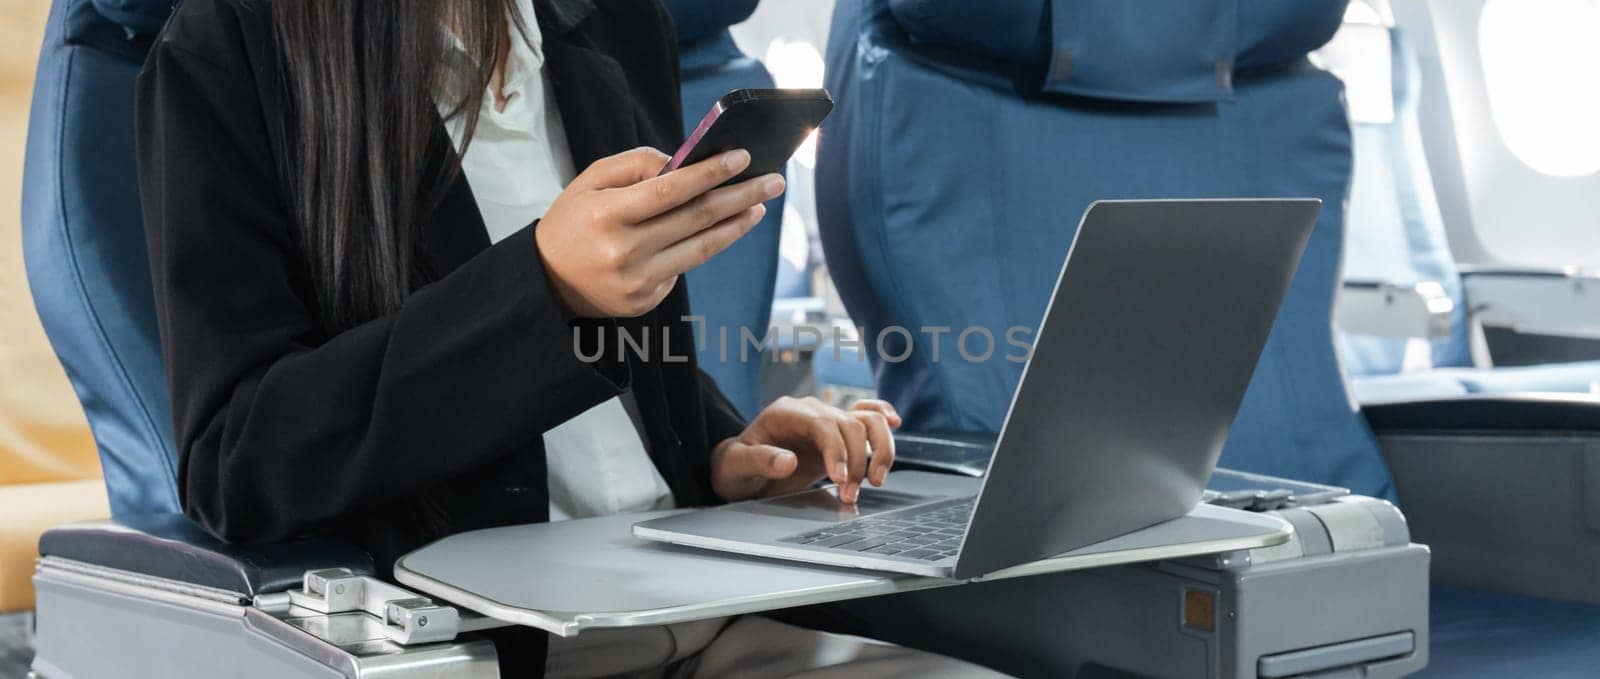 transport, tourism and technology concept - close up of business woman with smartphone and laptop traveling by plane.